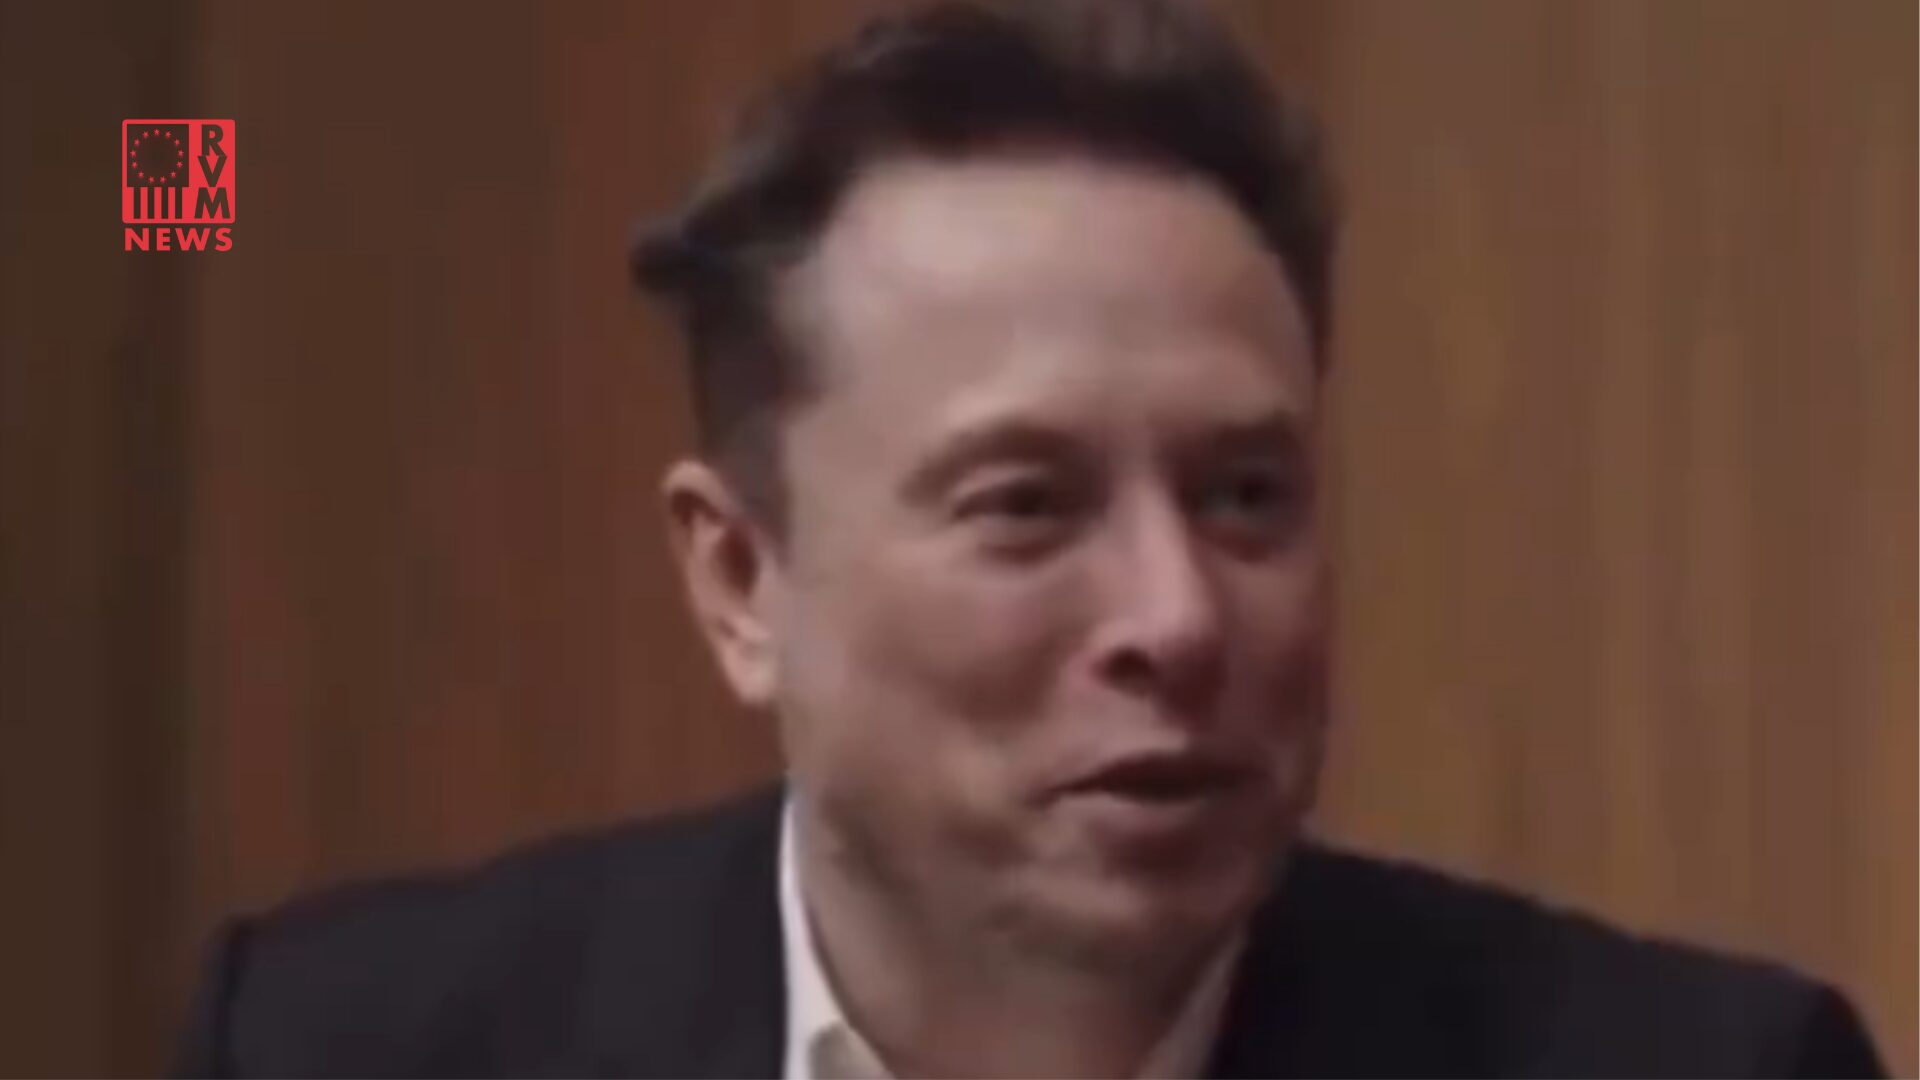 Elon Musk: How Much Do You Want To Give To A Corporation That Has A Monopoly On Violence? [VIDEO]